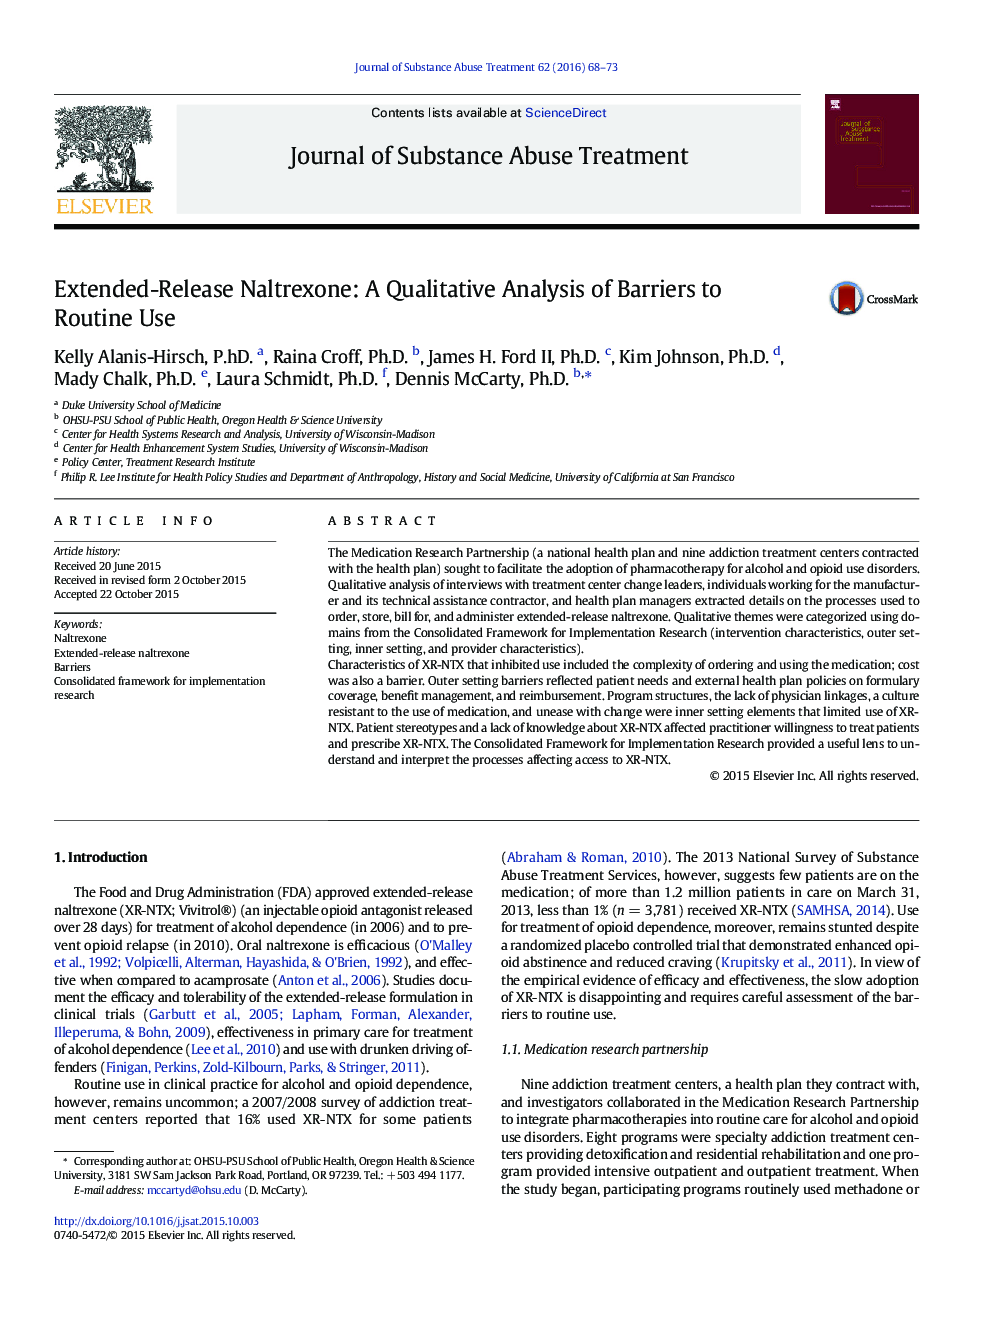 Extended-Release Naltrexone: A Qualitative Analysis of Barriers to Routine Use